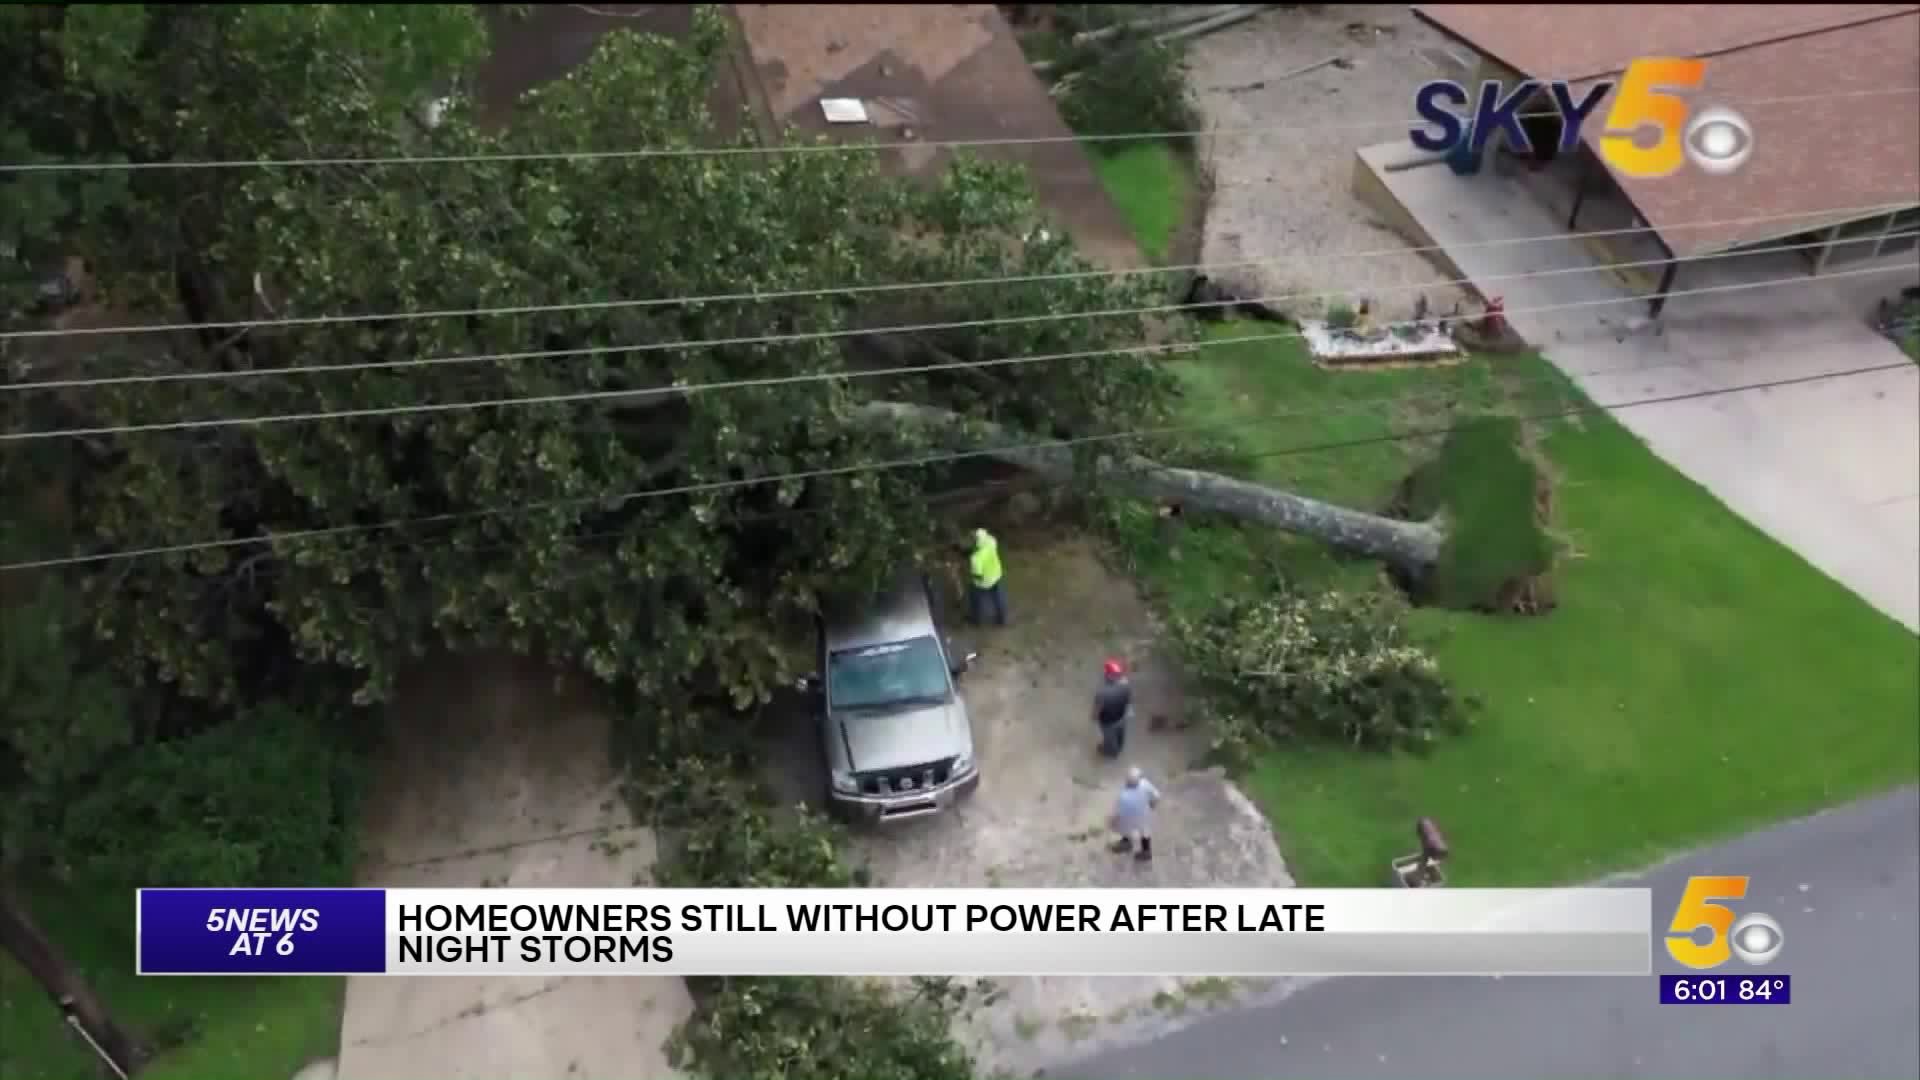 Homeowners Still Without Power After Late Night Storm